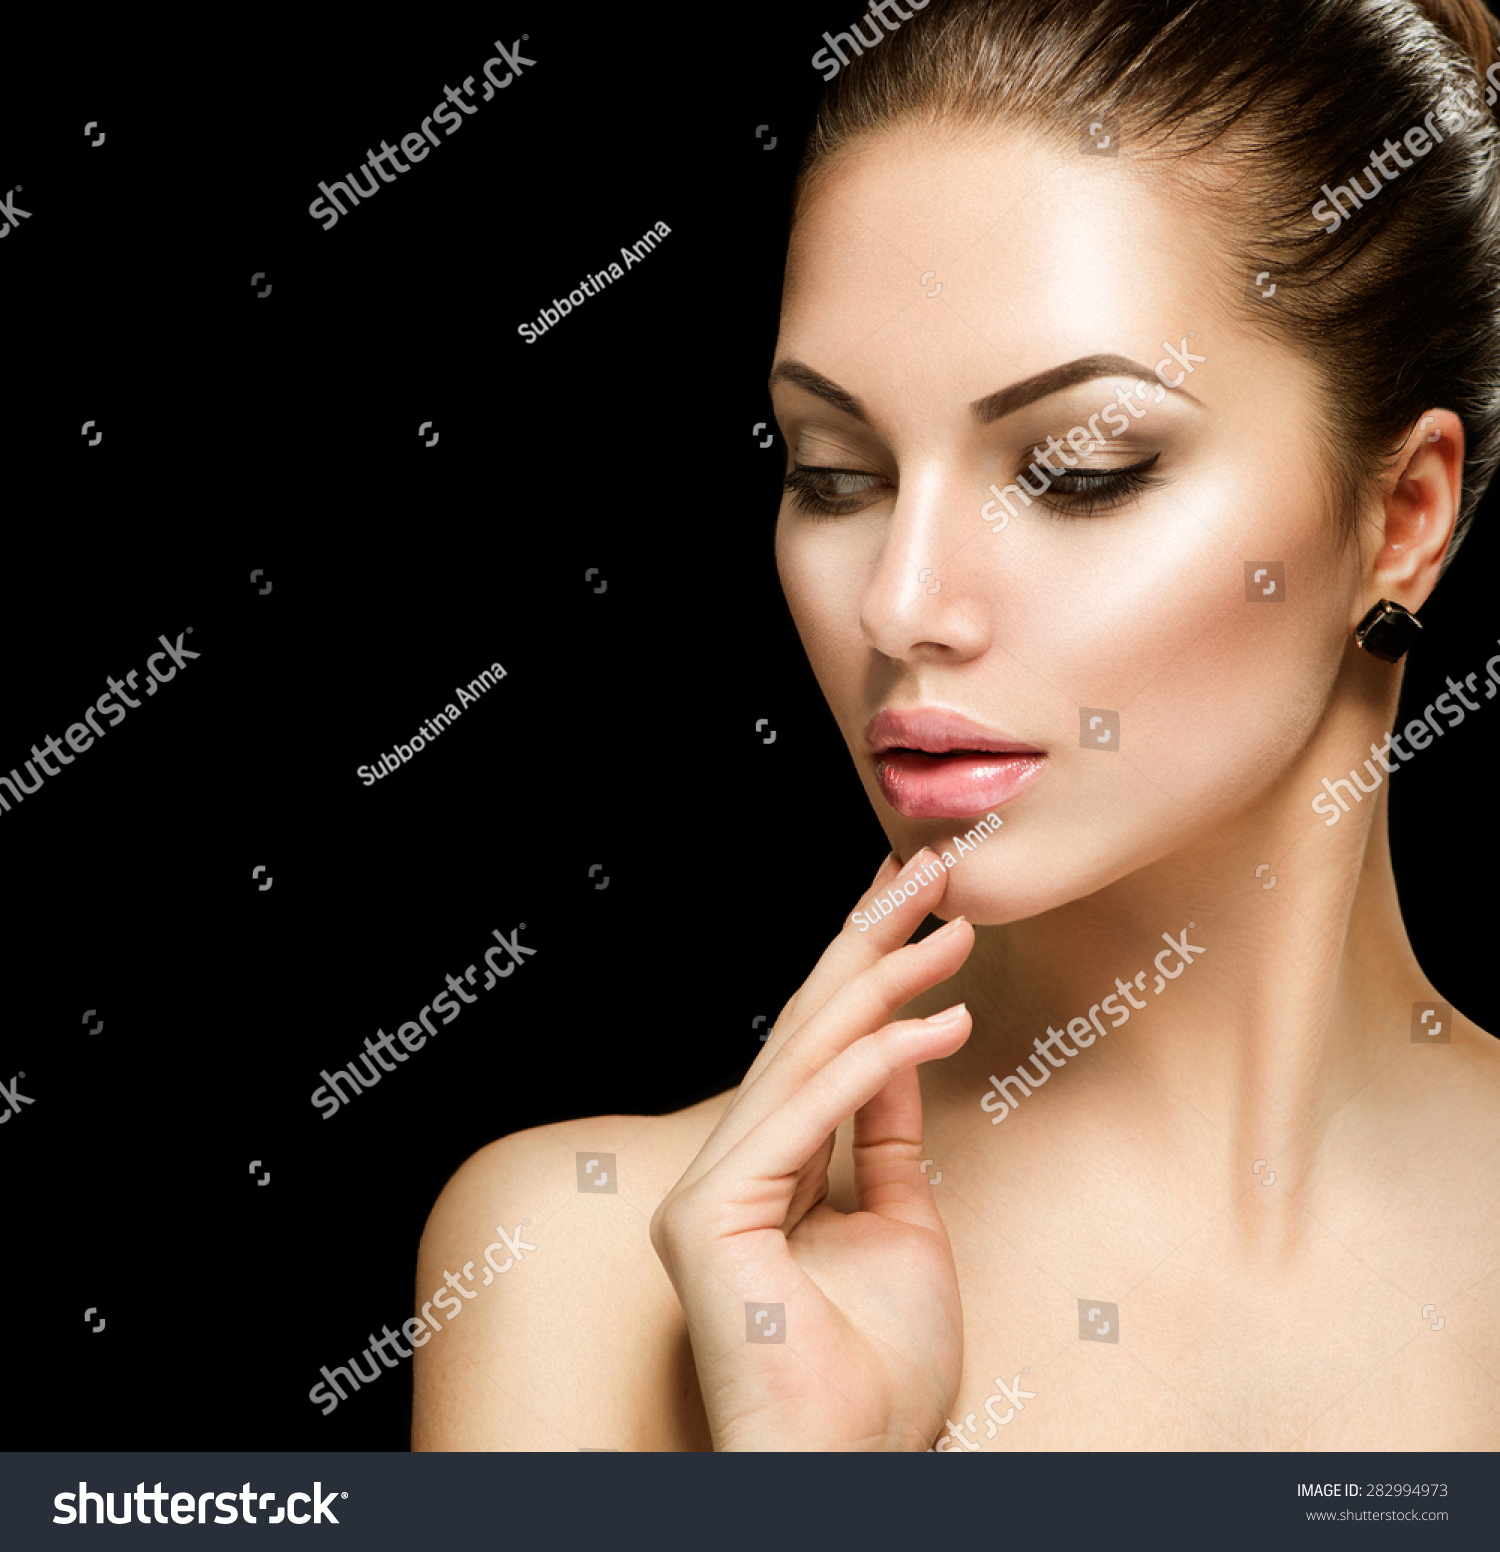 Beauty Woman Face Closeup Isolated On Stock Photo 282994973 ...